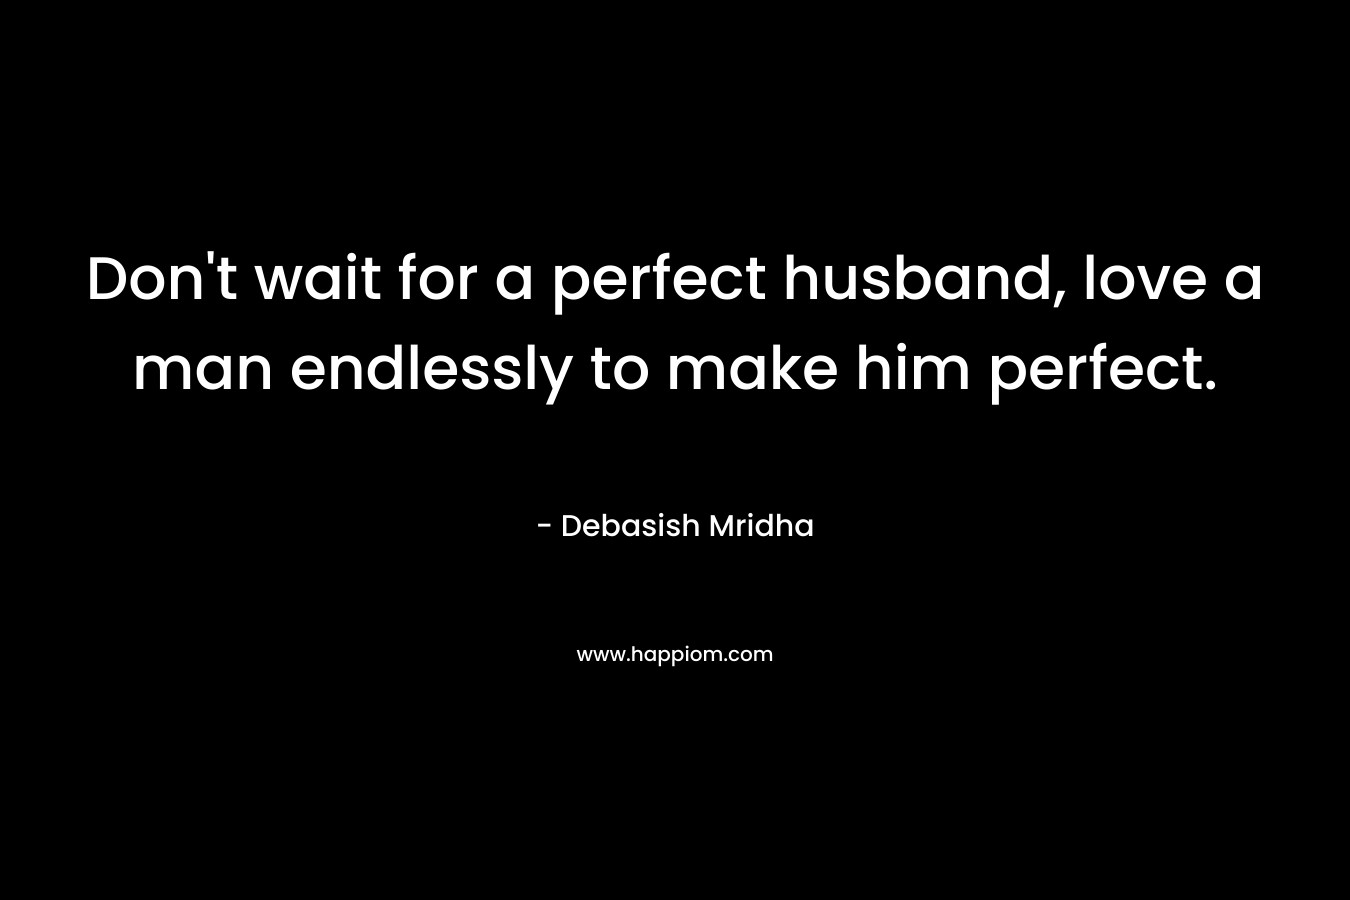 Don't wait for a perfect husband, love a man endlessly to make him perfect.